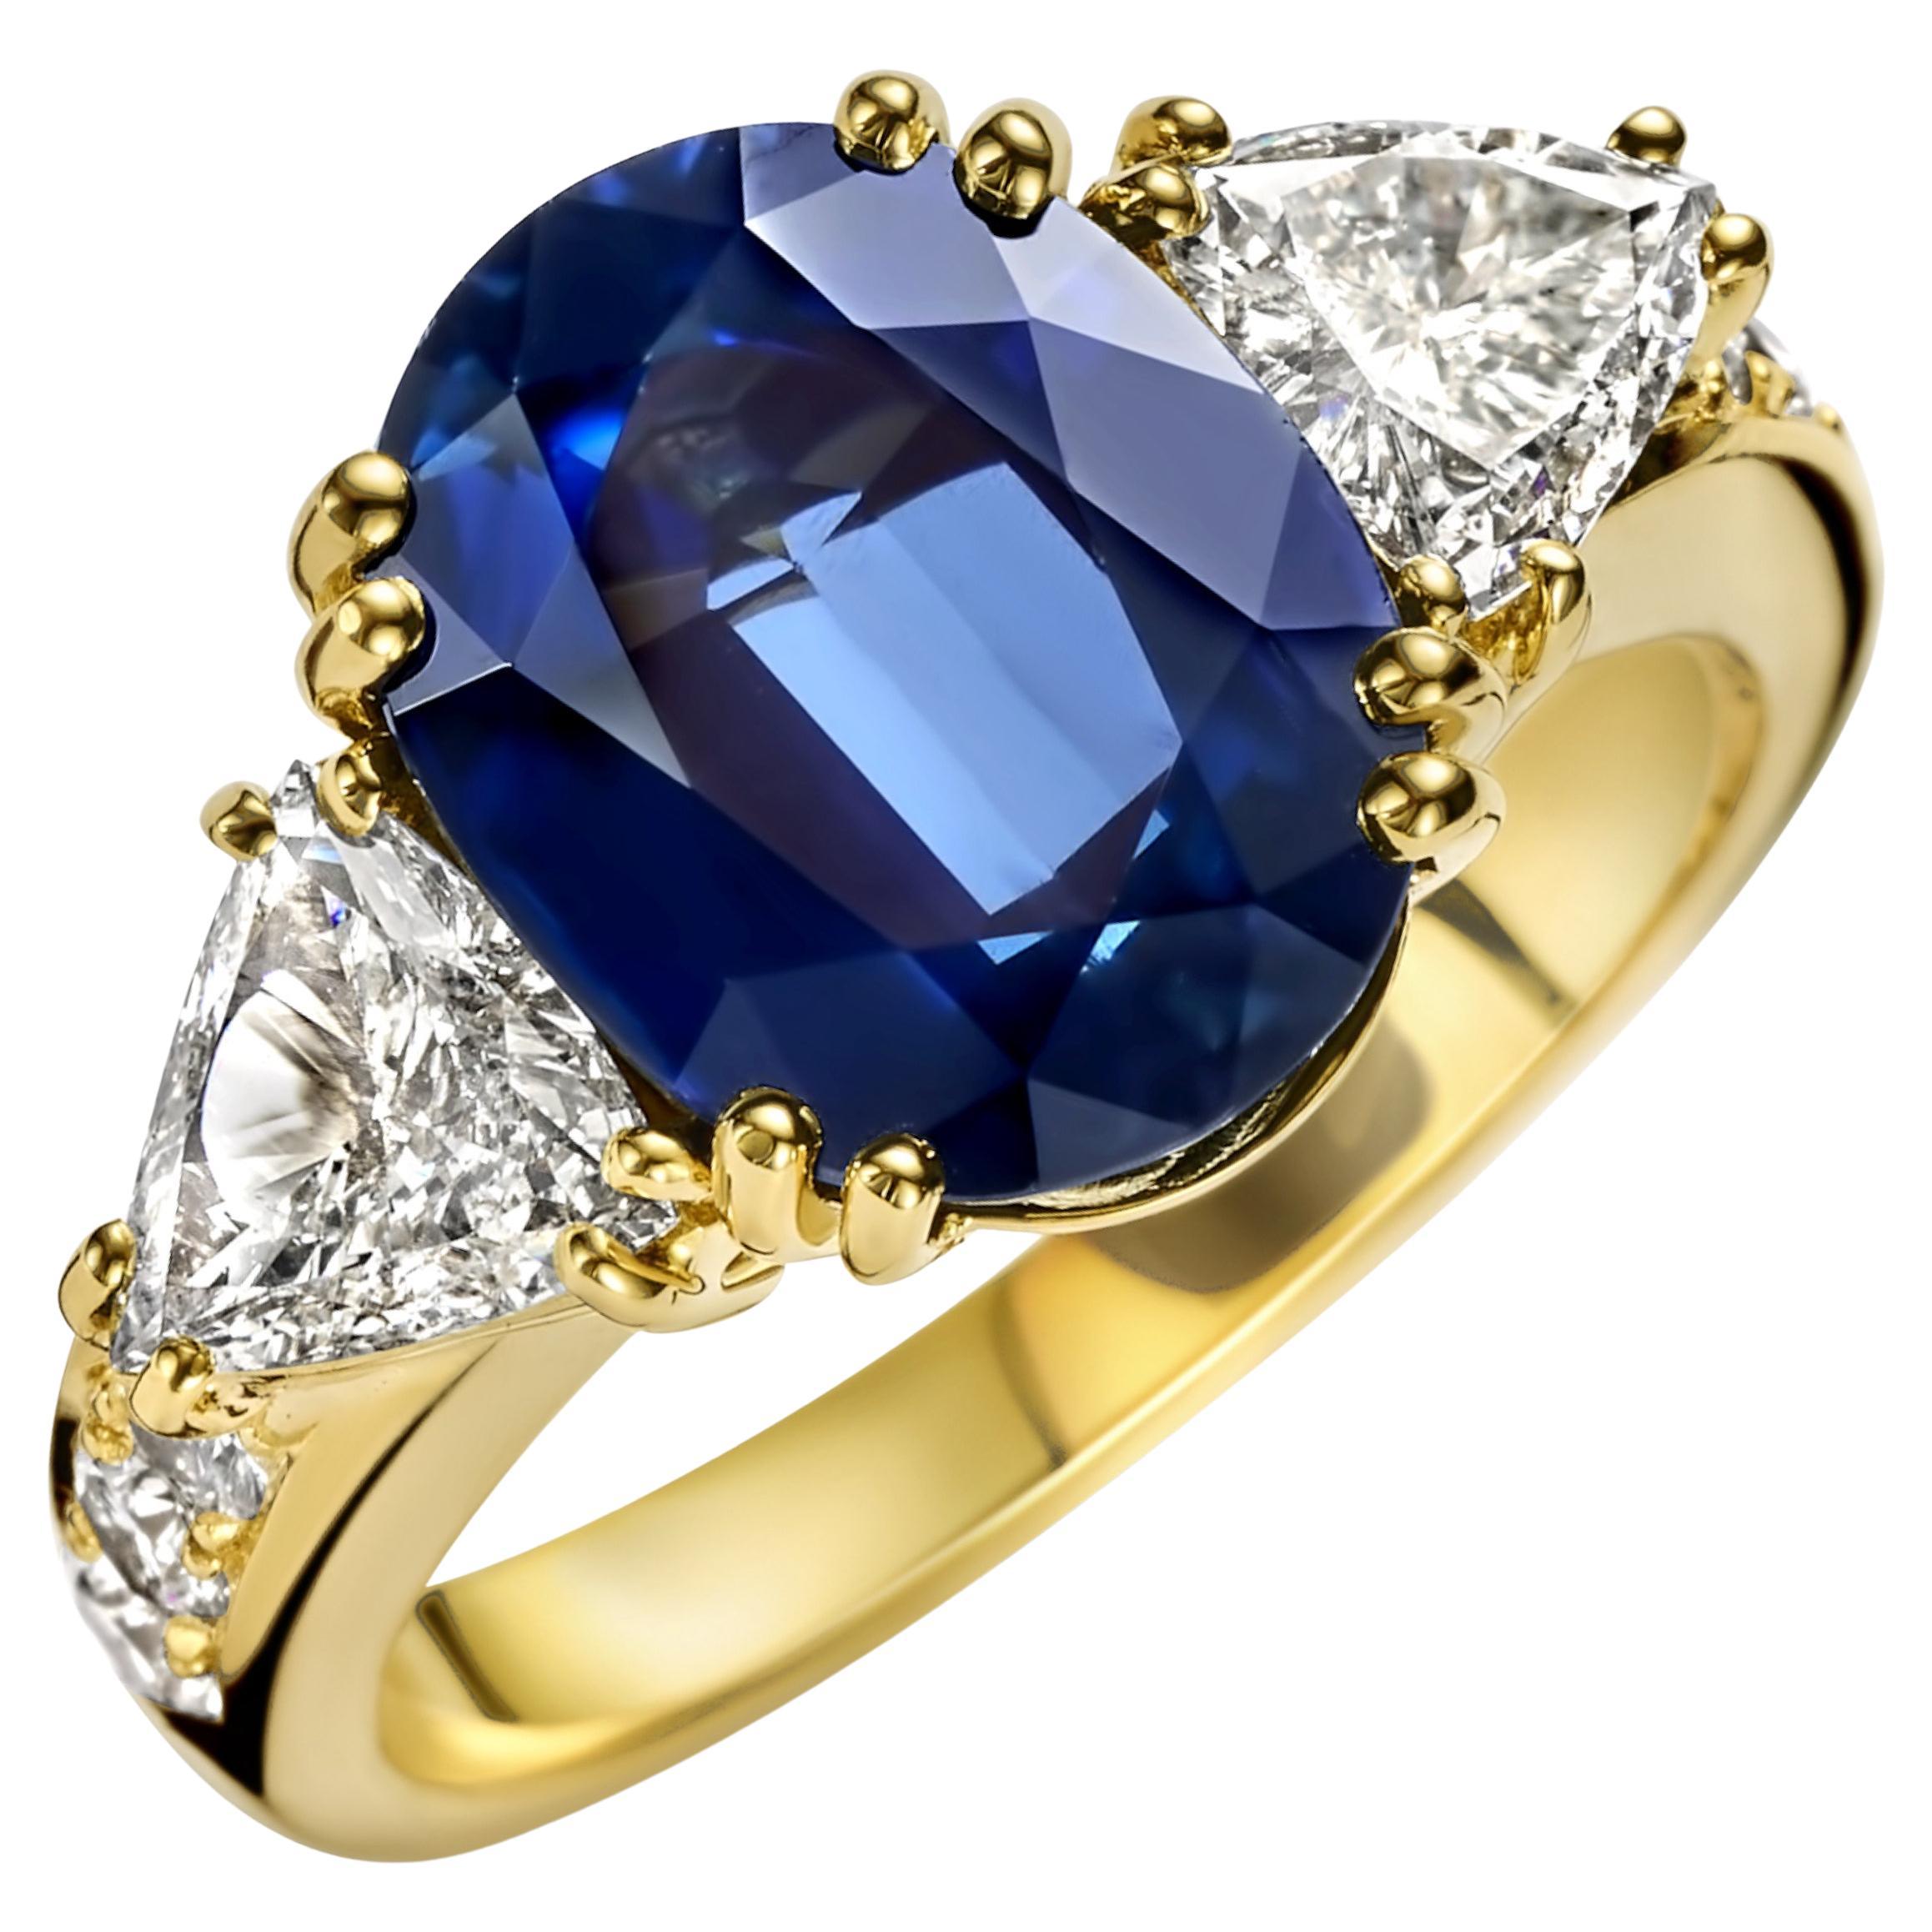 18kt Yellow Gold Ring with Beautiful 6.68ct Sapphire & 1.07ct Triangle Diamonds